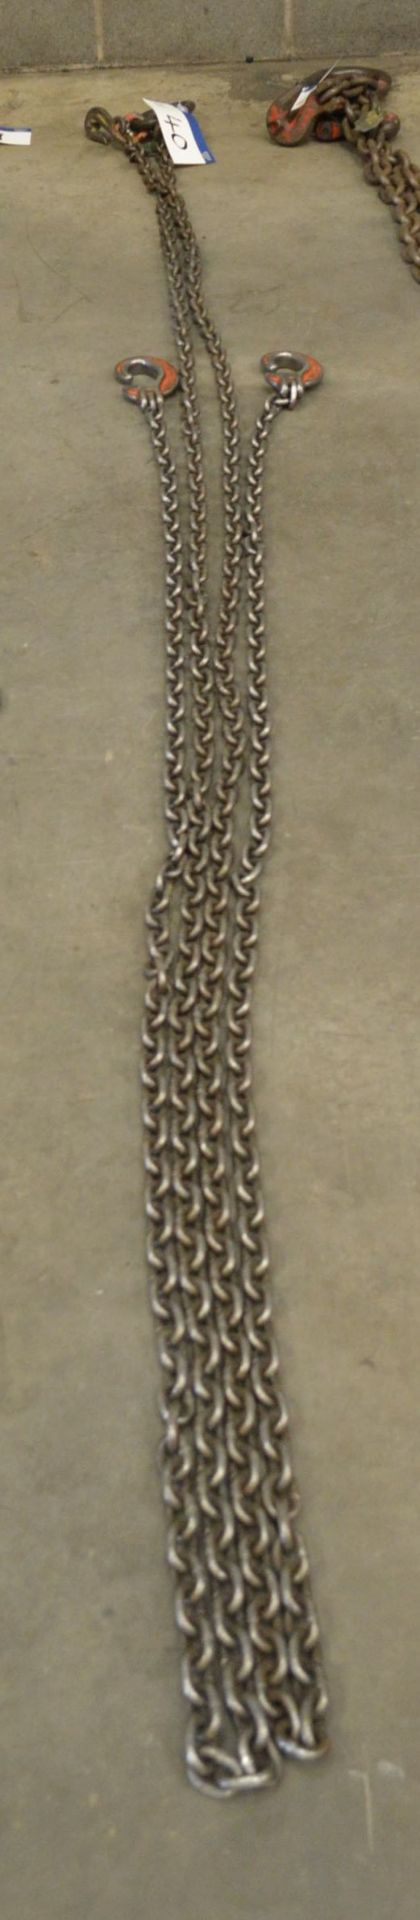 Pewag Two Leg Chain Sling, approx. 8m long, with tensioners